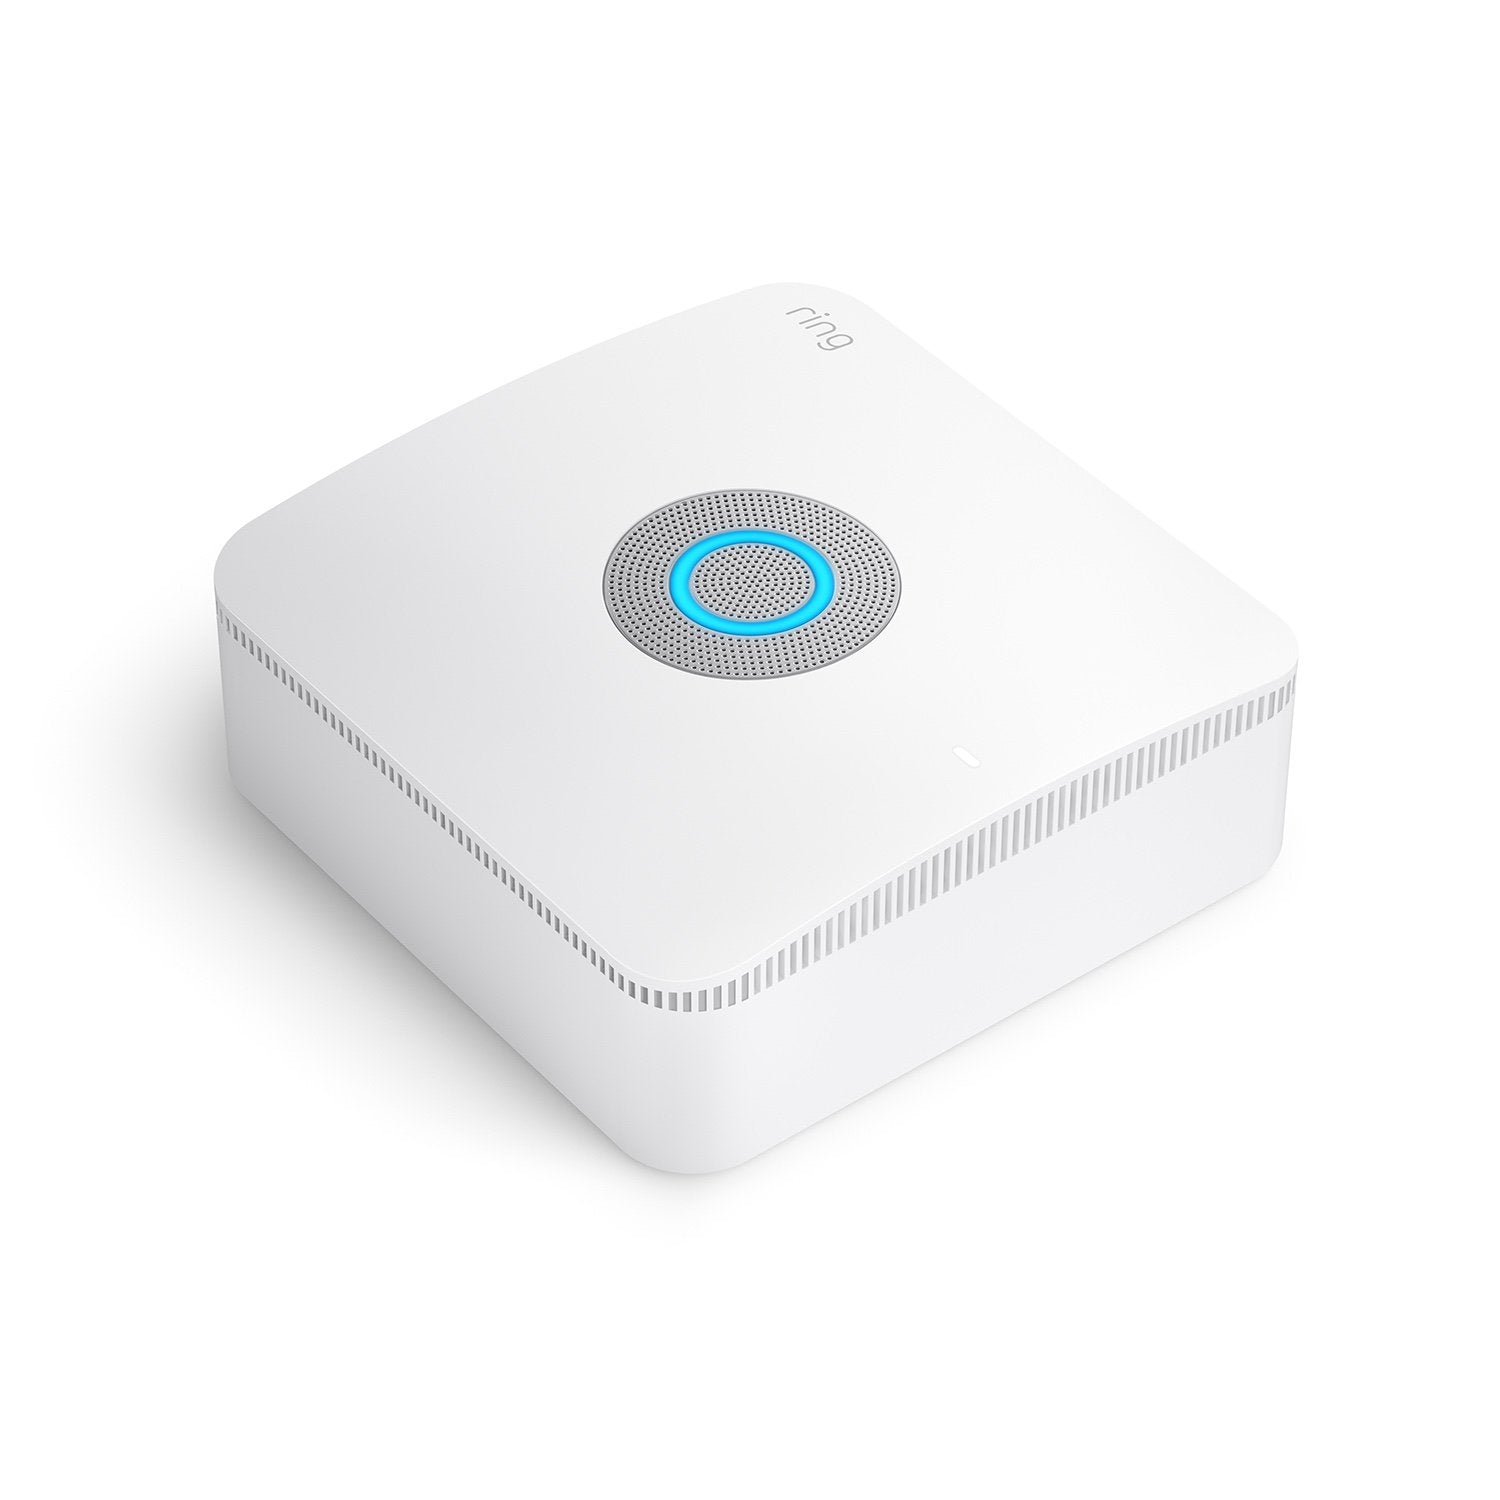 Alarm Pro Base Station (for with built-in eero Wi-Fi 6 router) - Alarm Pro Base Station with built-in eero Wi-Fi 6 router